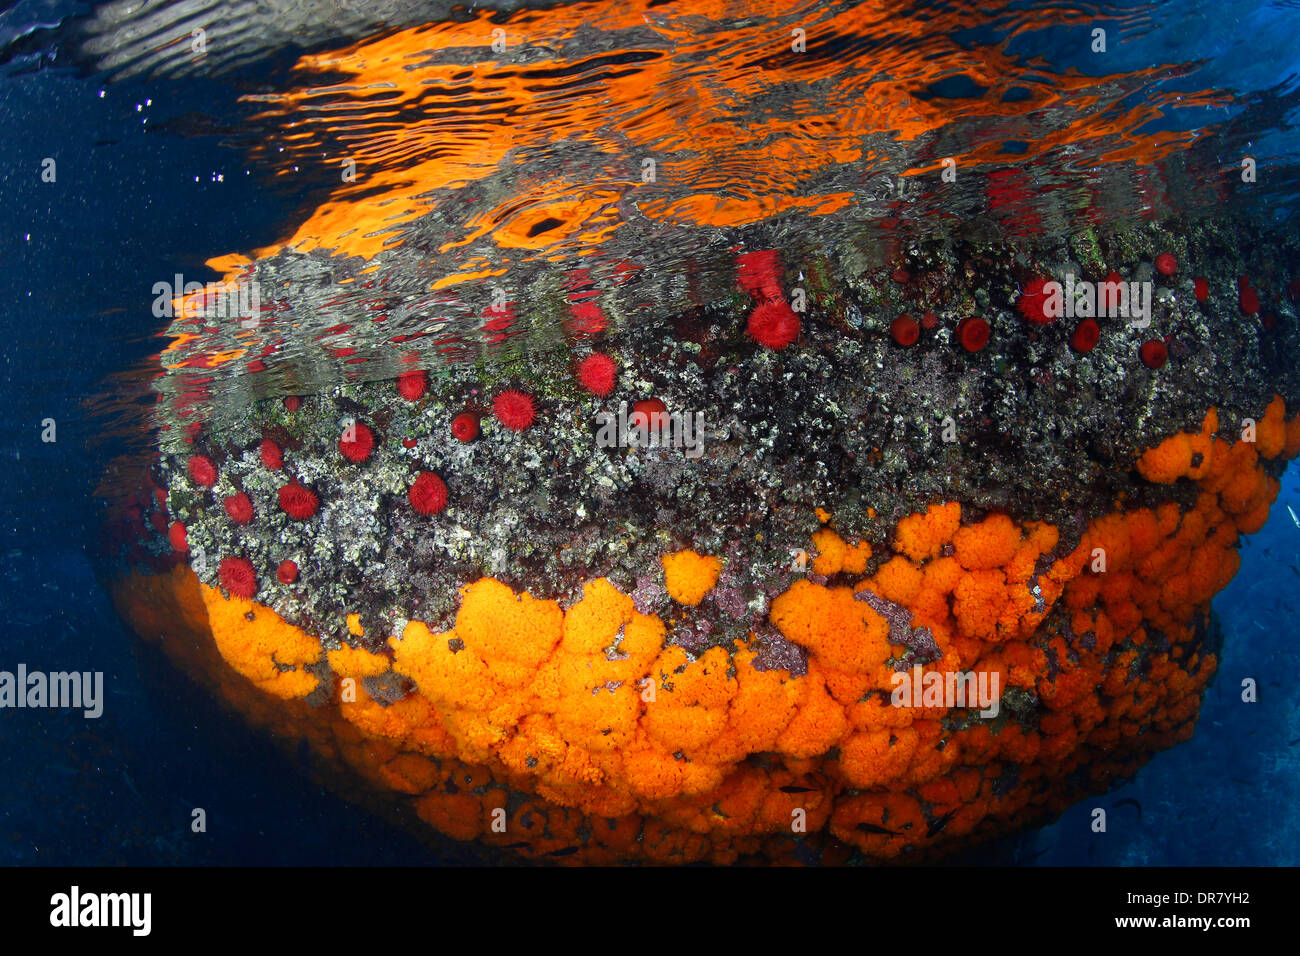 A colorful wall of orange corals and sea tomatoes Stock Photo